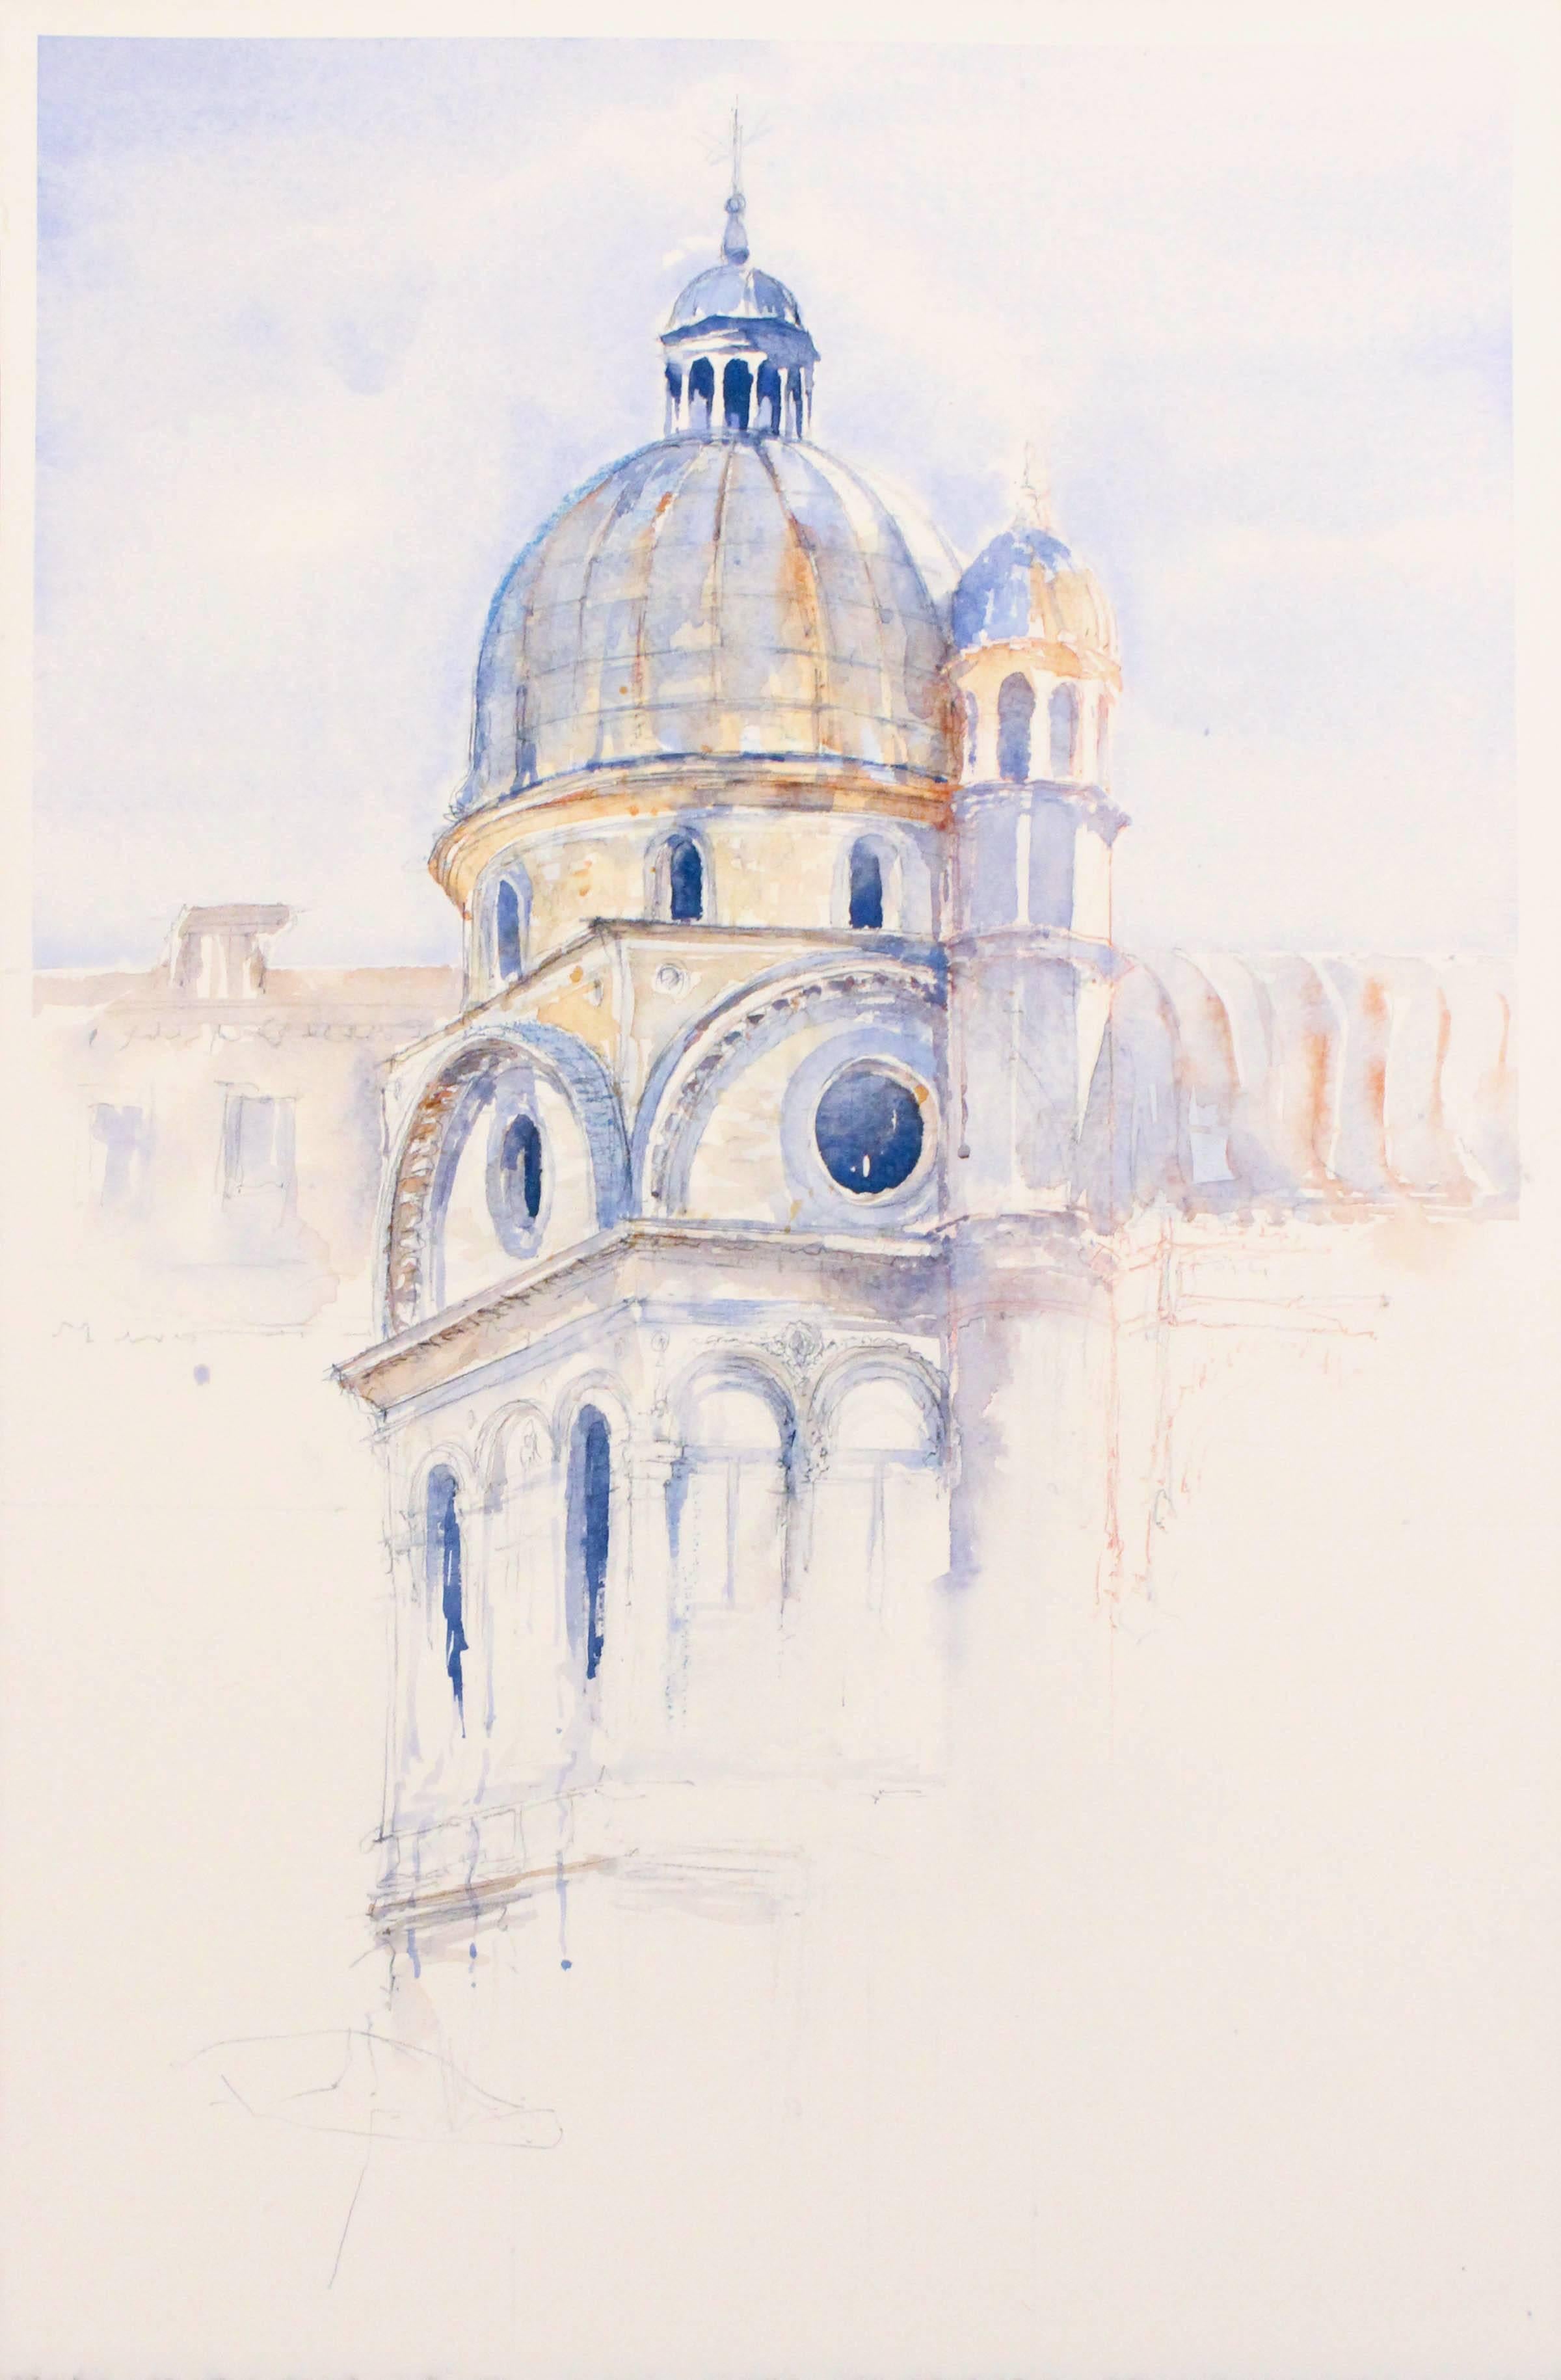 "Duomo" - Venice - Architectural Watercolor Painting - Turner